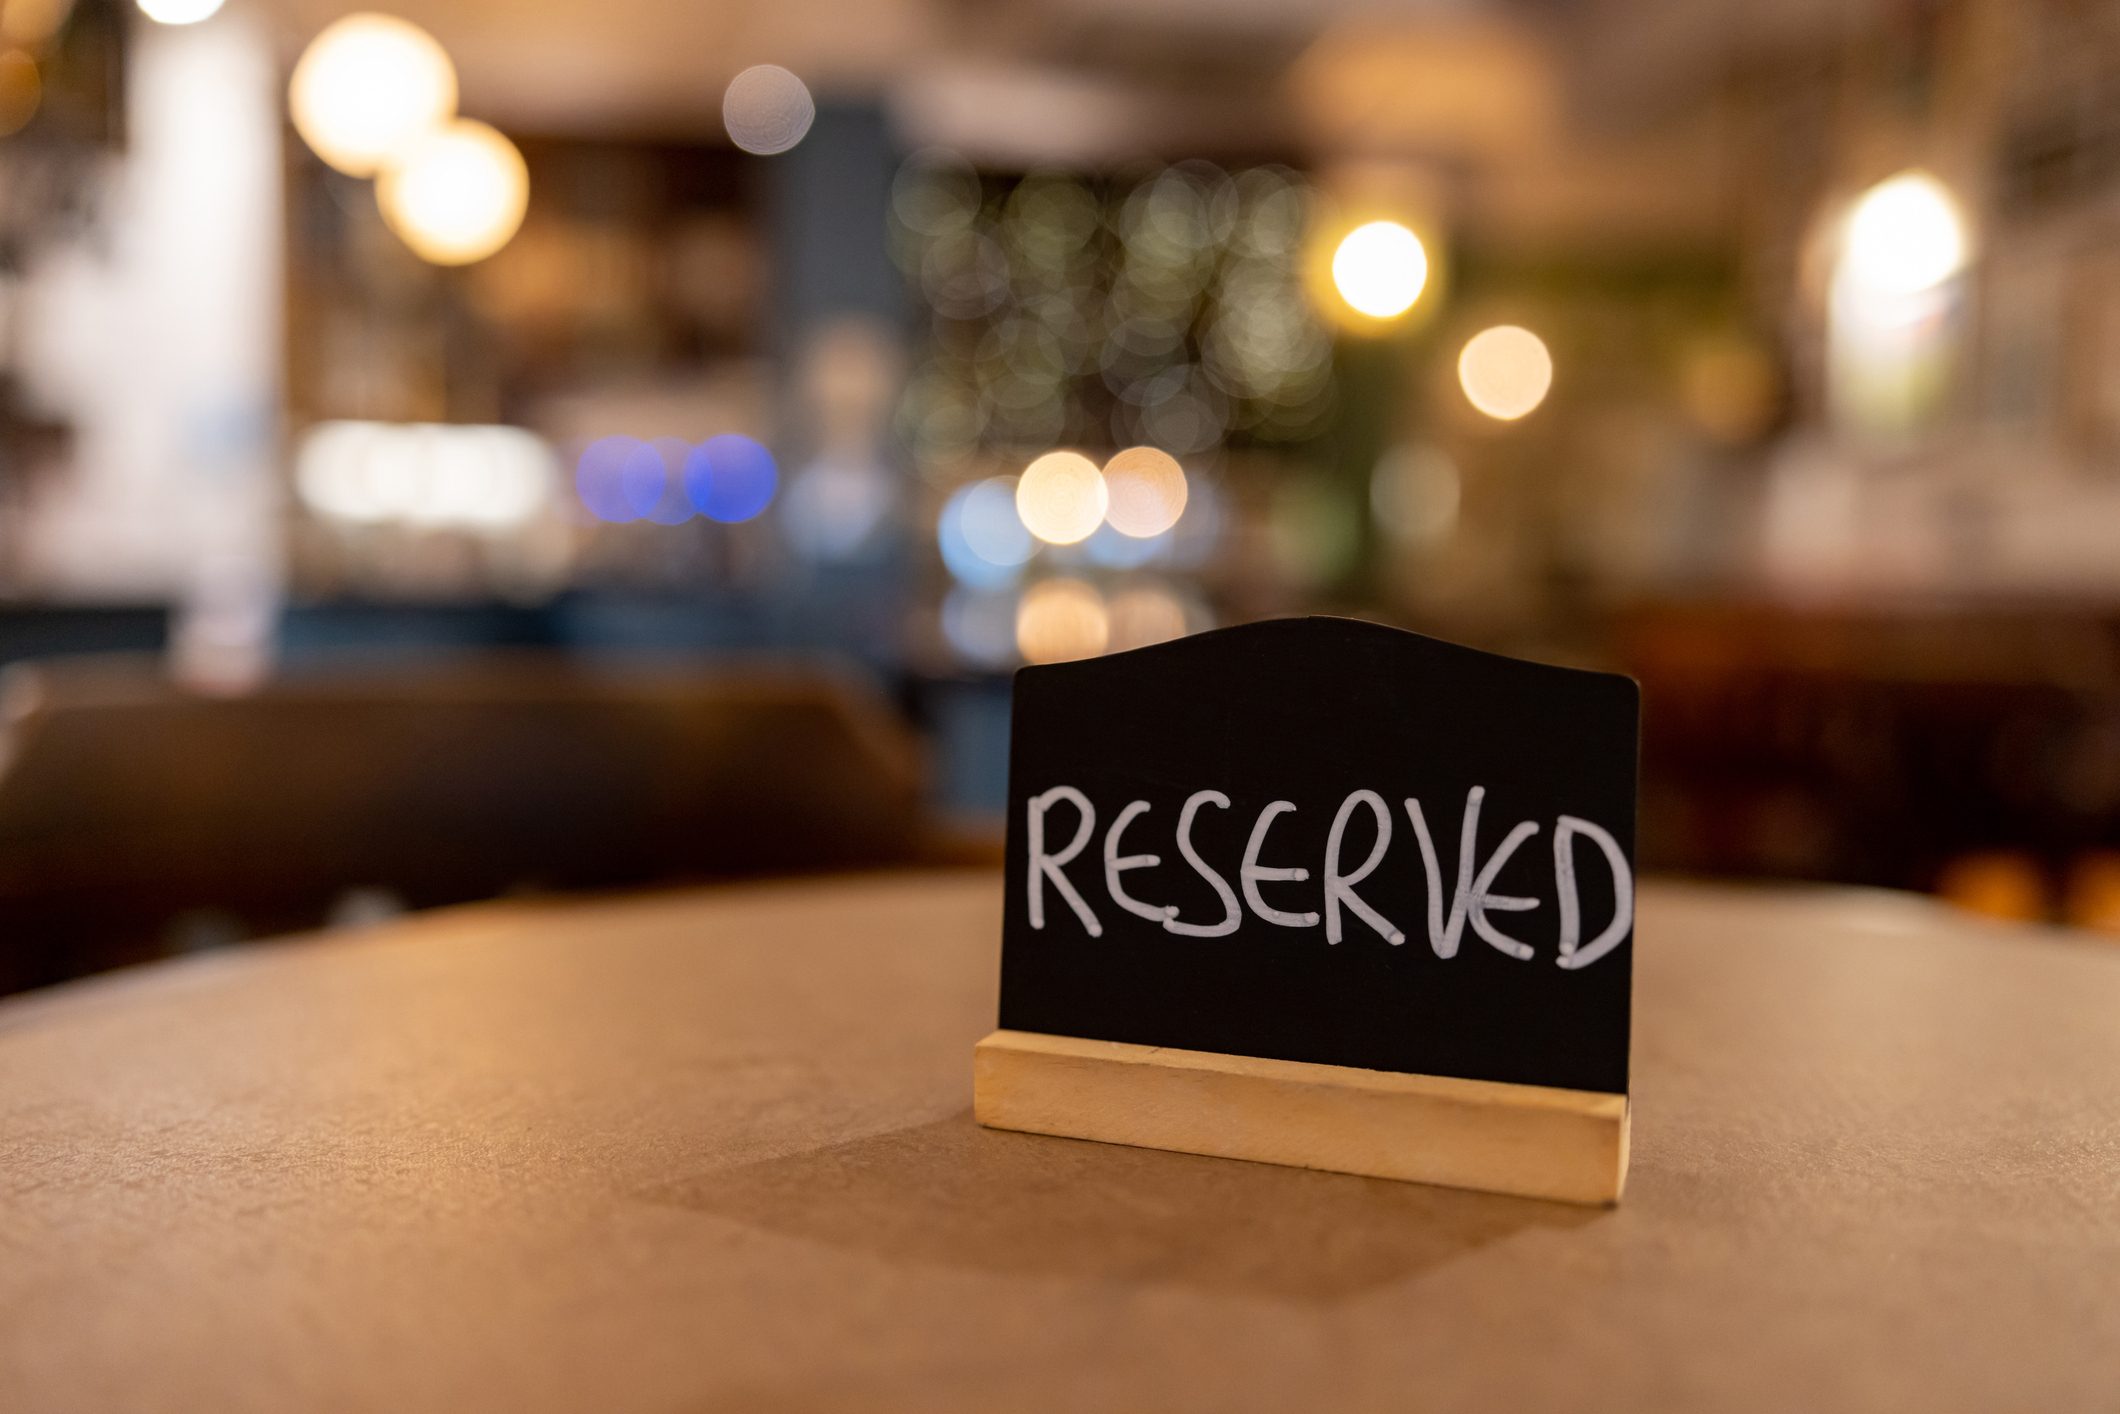 Reserved sign on a table in a softly lit restaurant ambiance